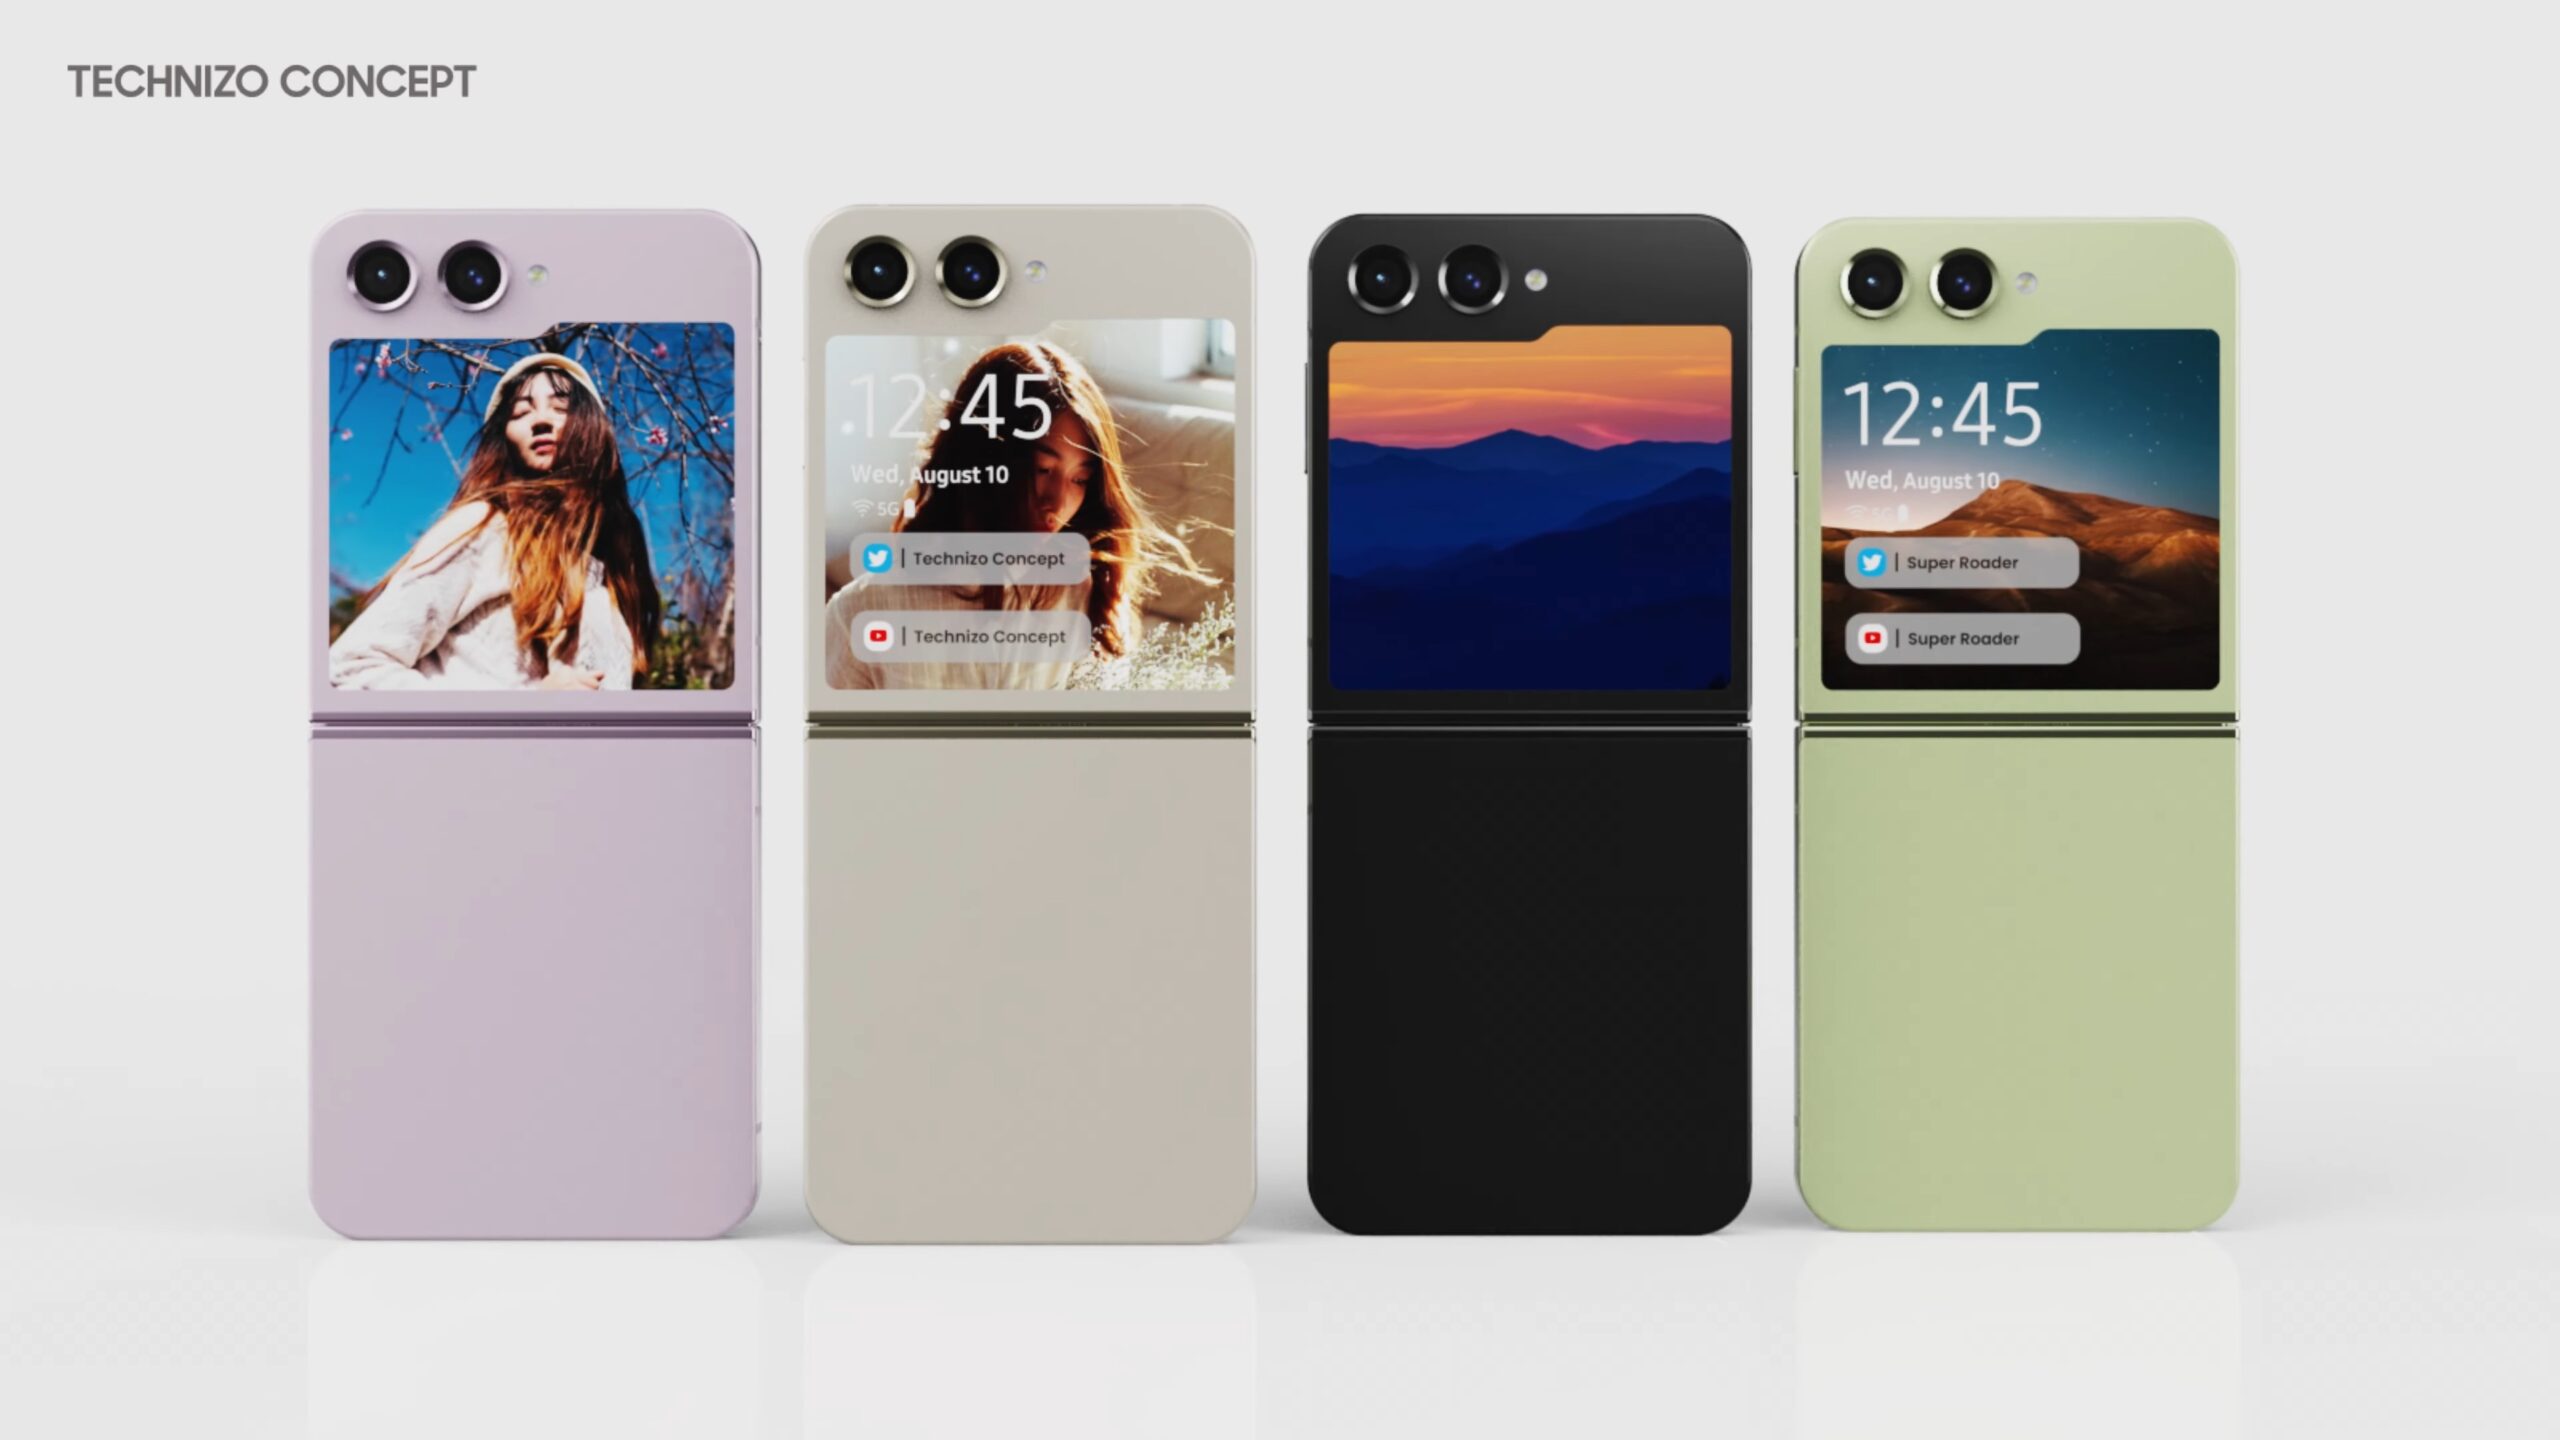 Best Samsung Galaxy Z Flip 5 cases and covers